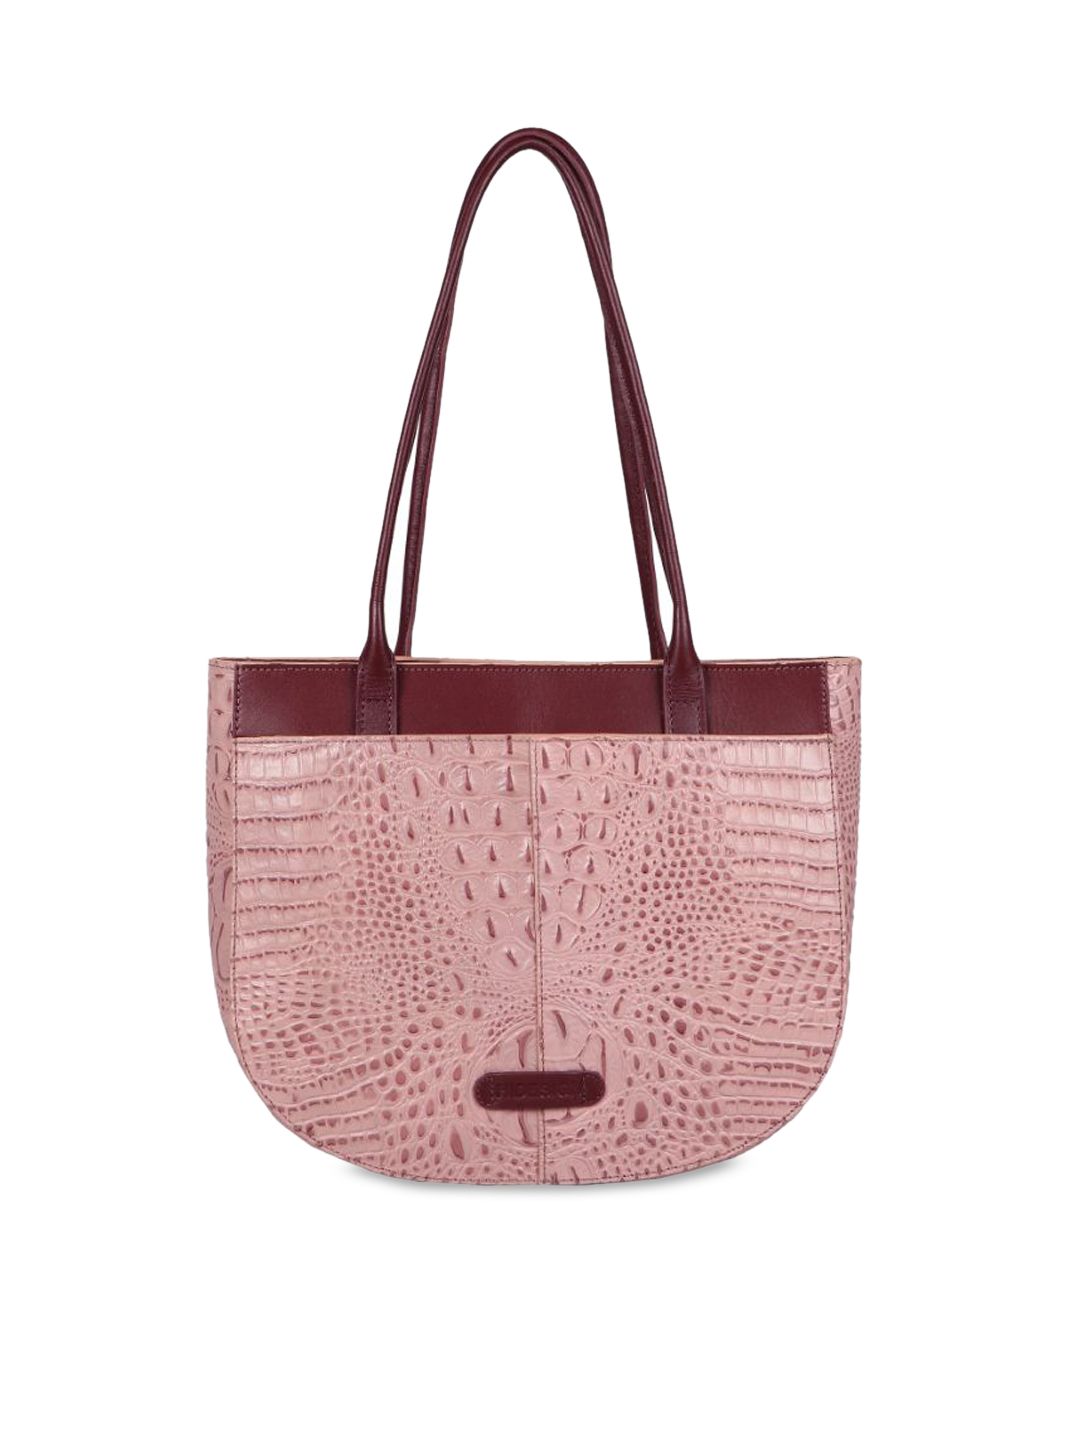 Hidesign Pink Animal Textured Leather Half Moon Shoulder Bag with Applique Price in India